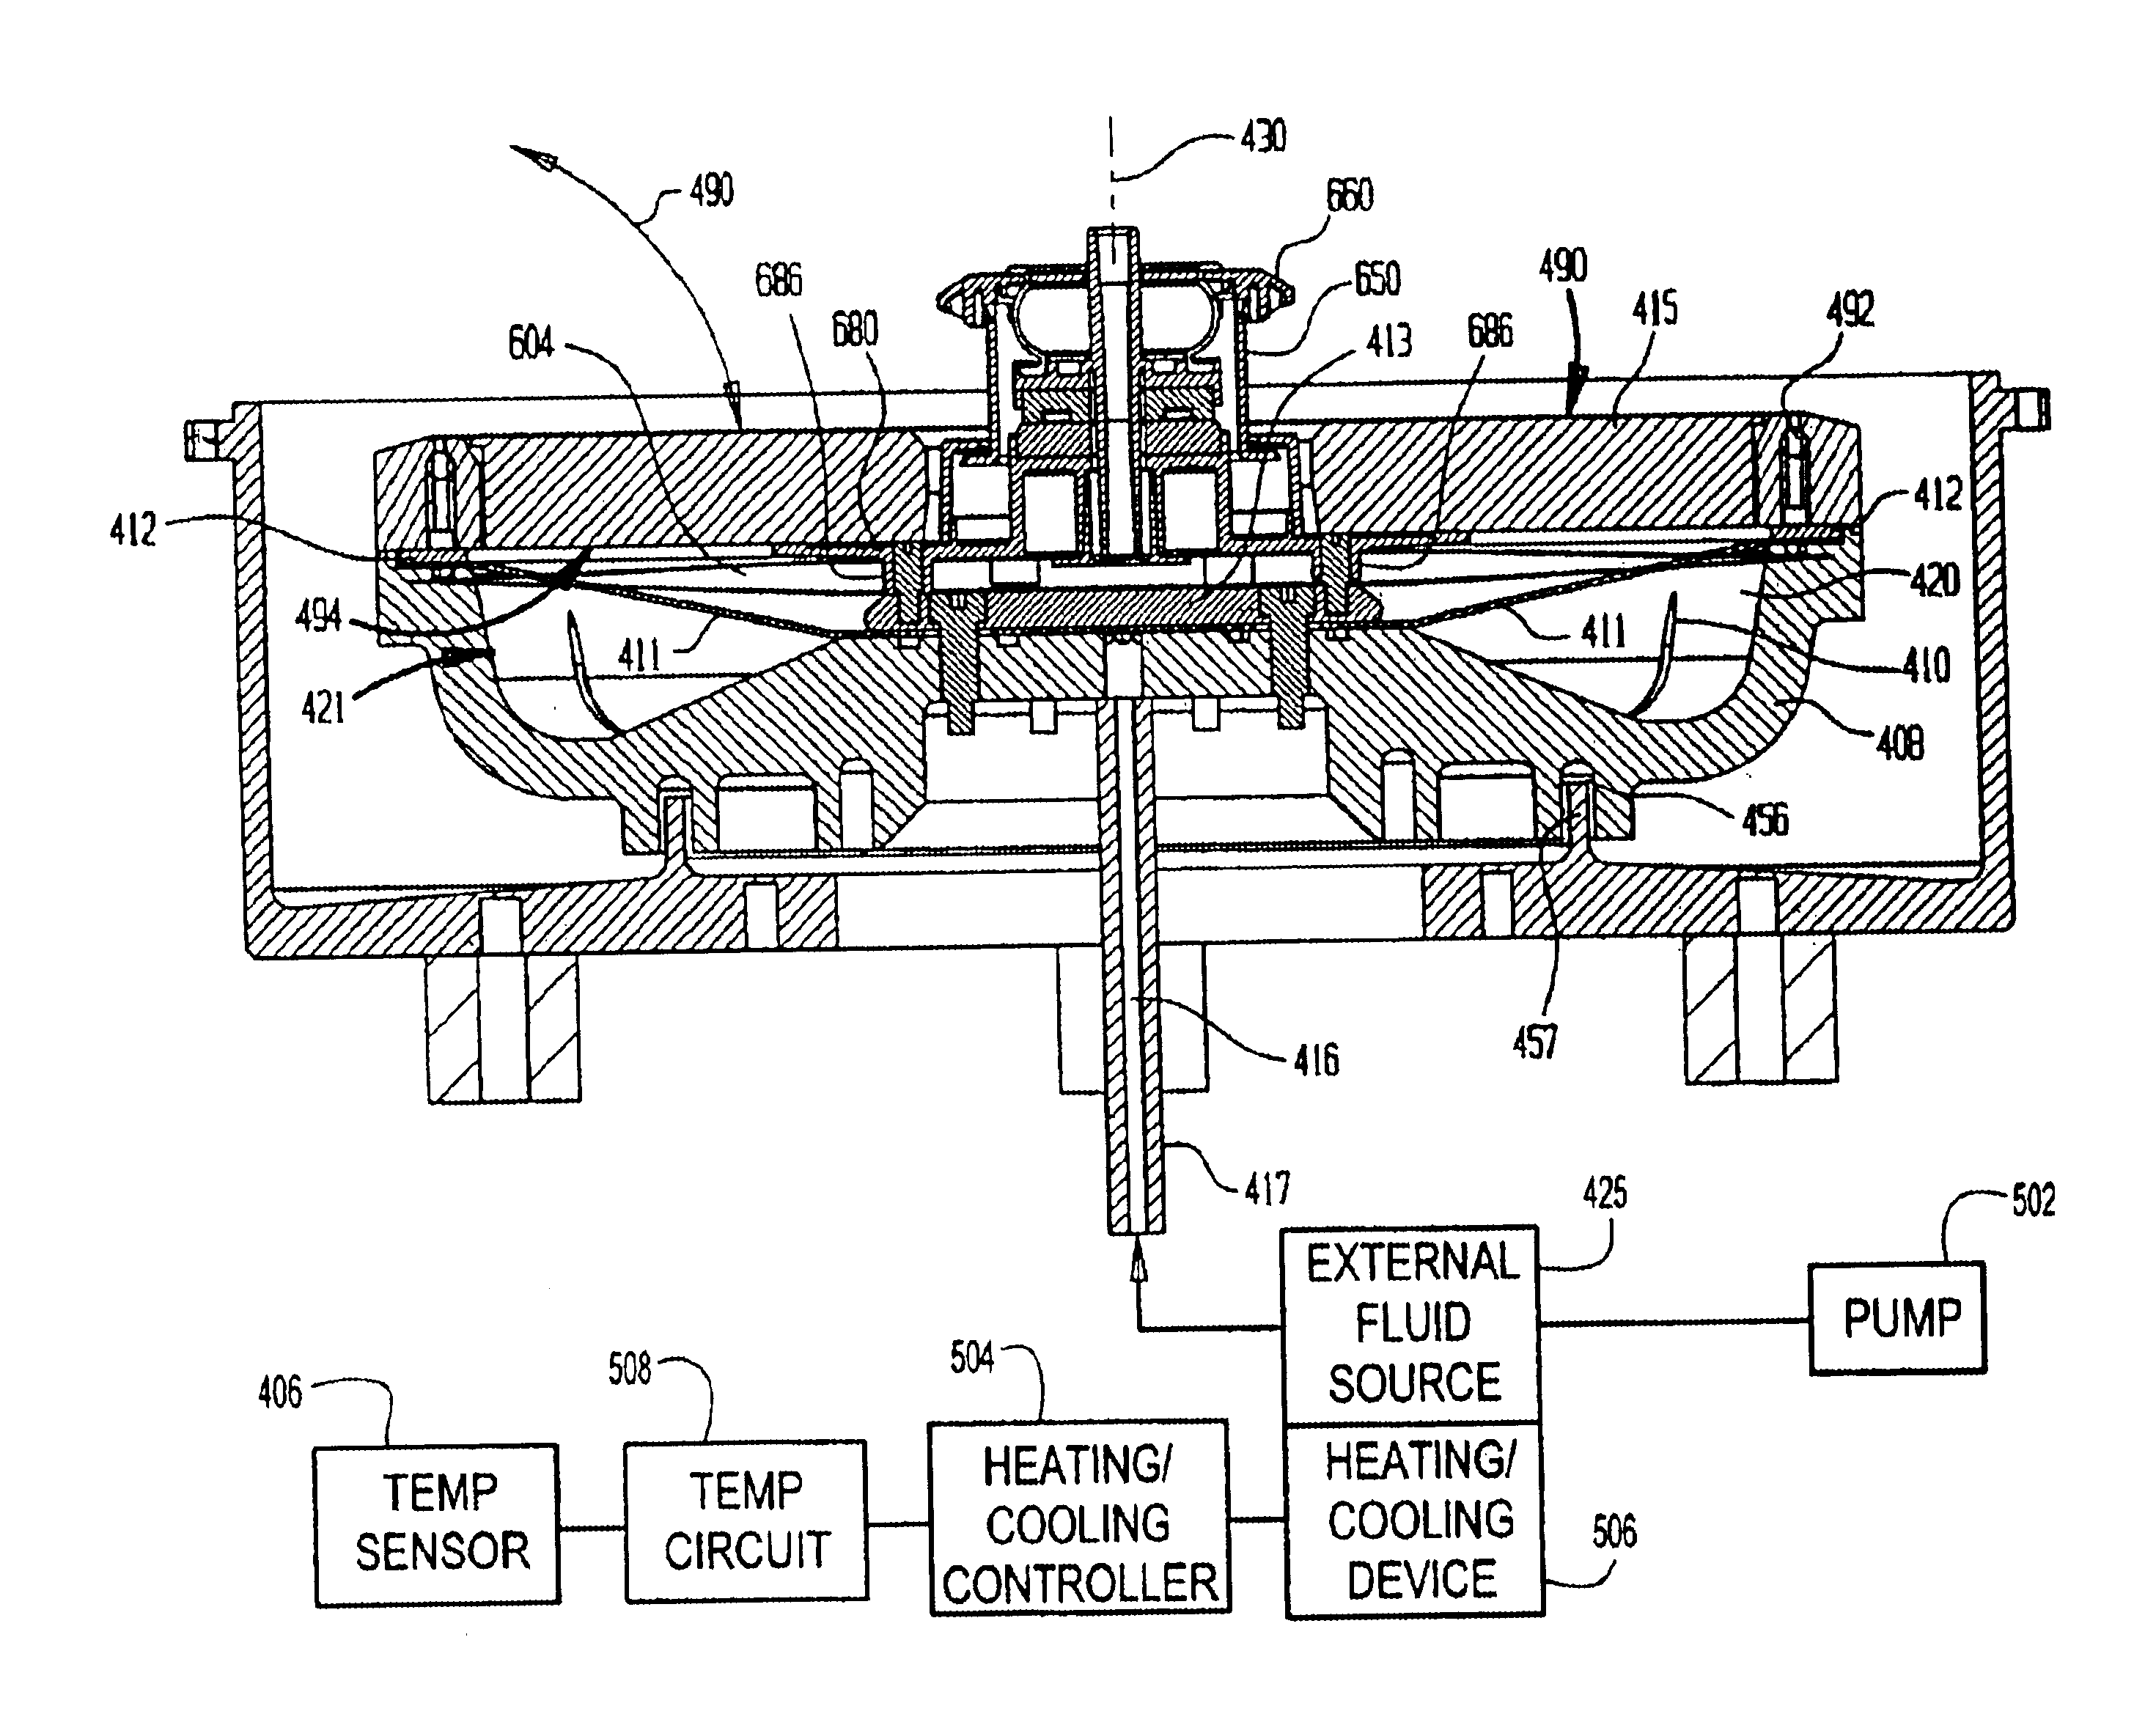 Biological processing apparatus for expressing fluid material